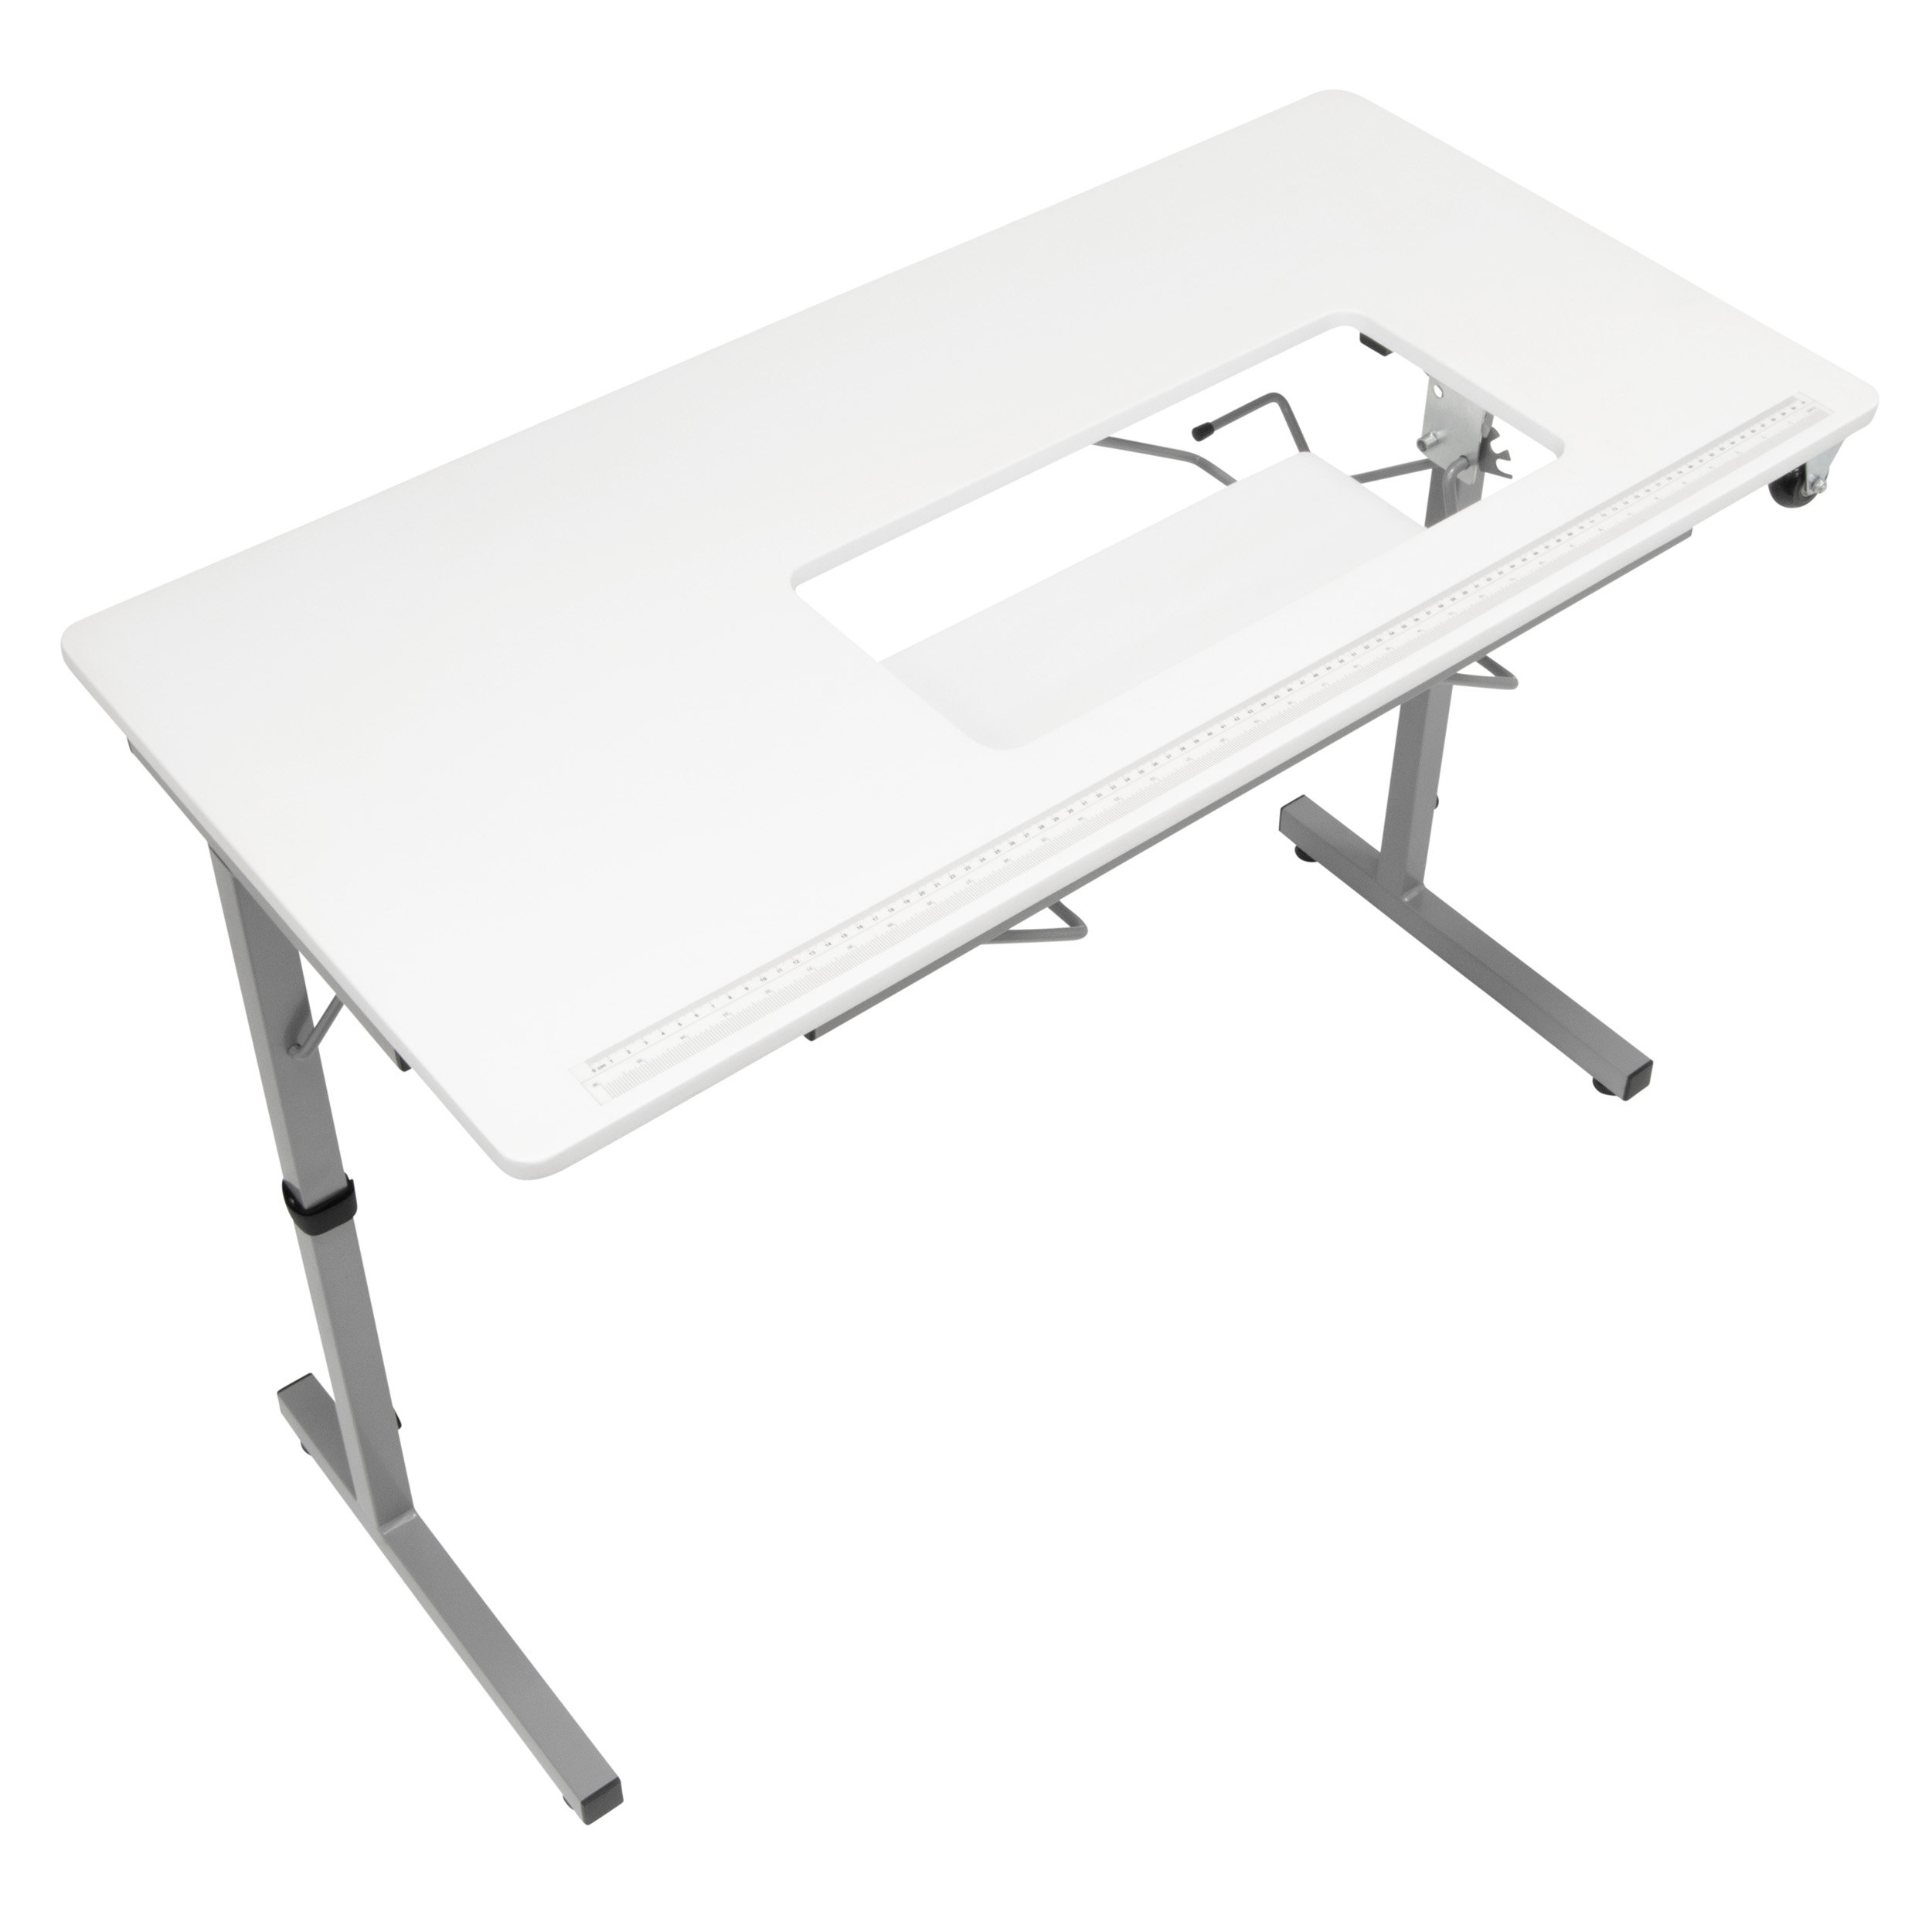 Rollaway II Compact Portable Folding Sewing Table, Silver/White